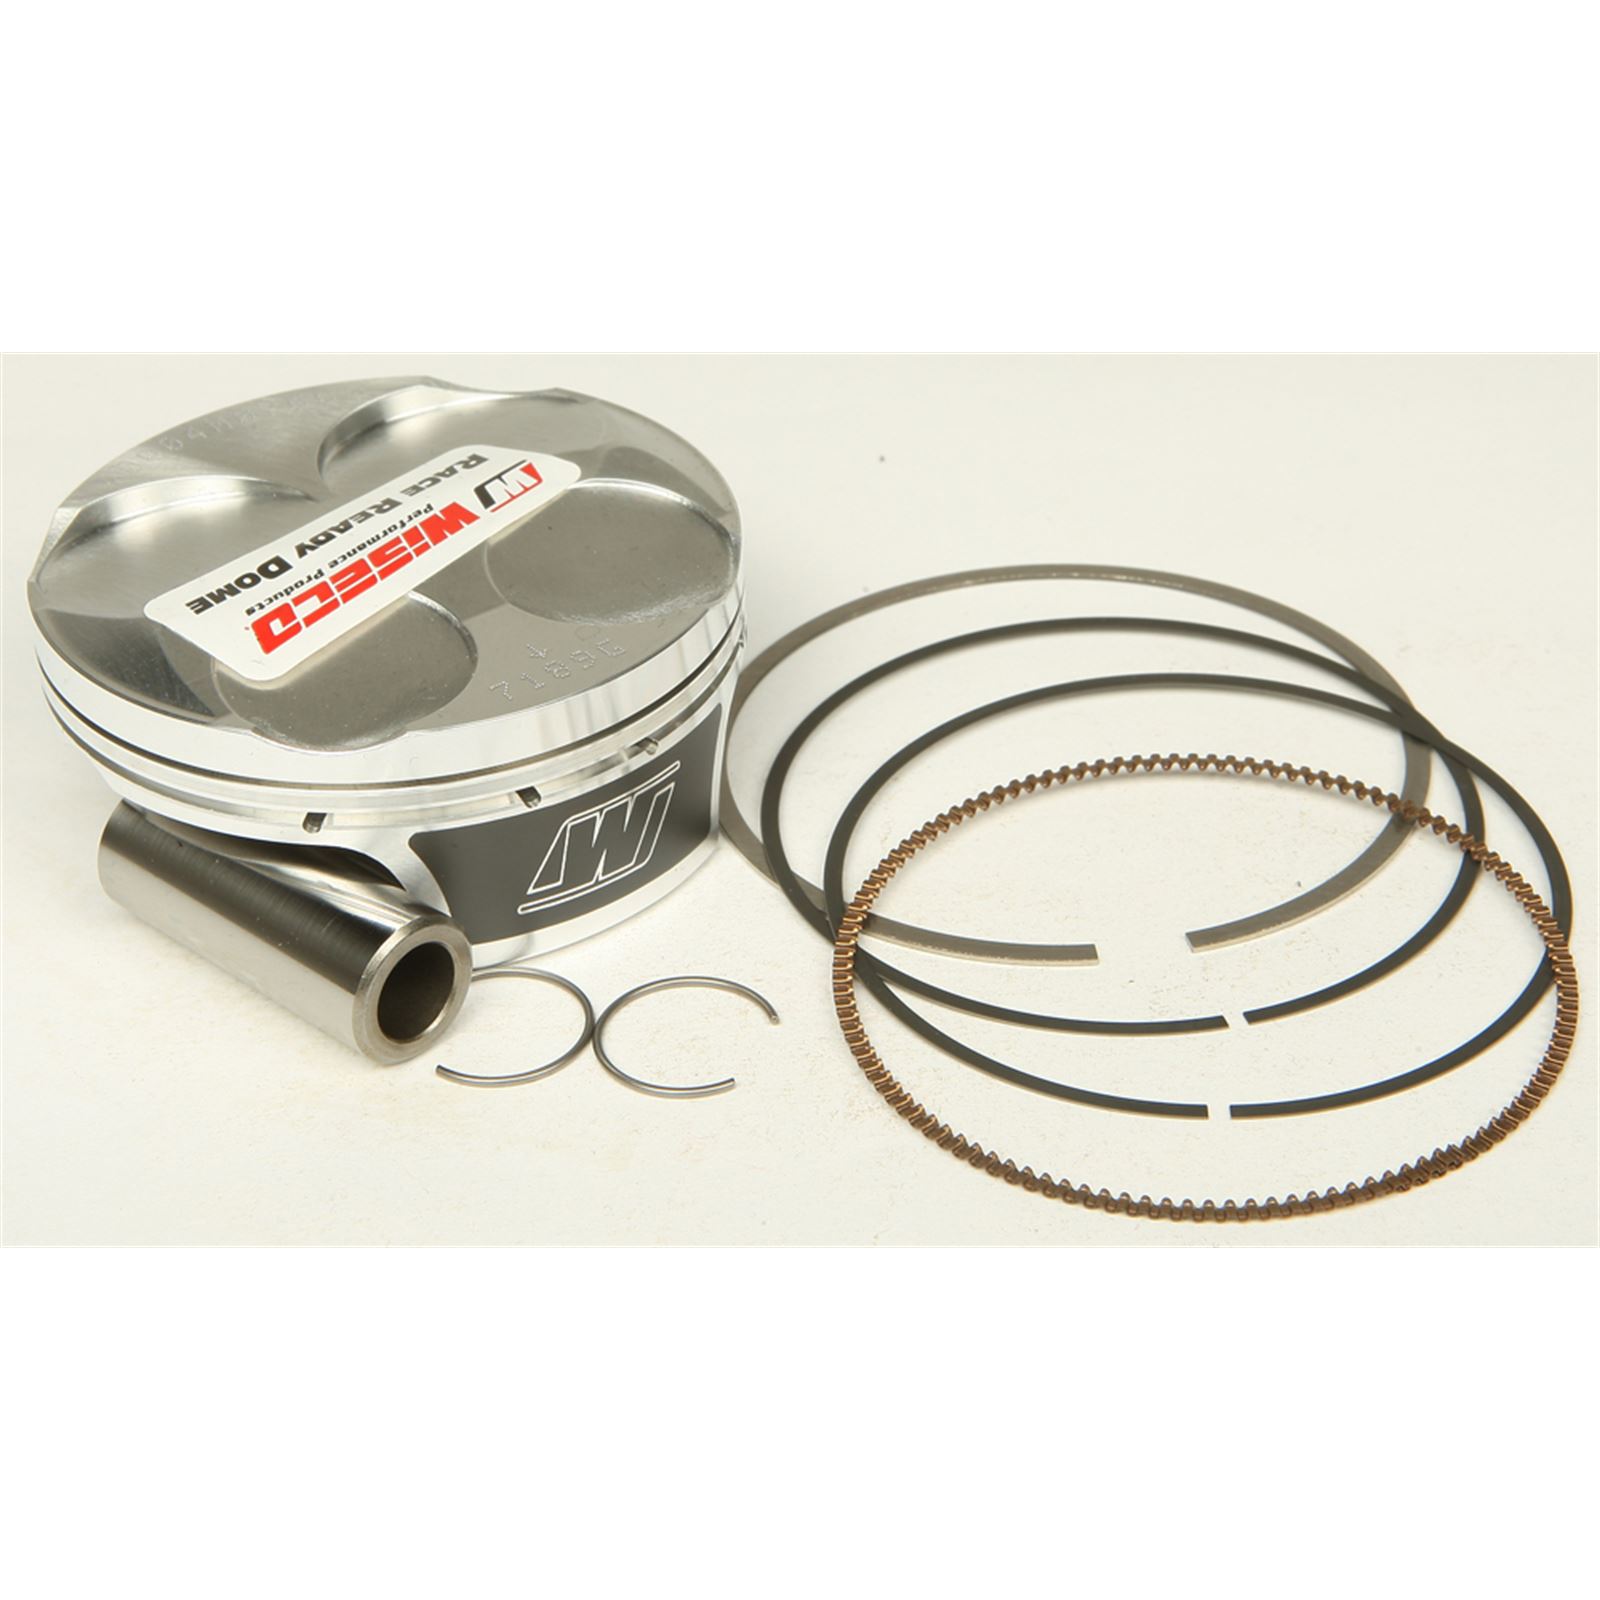 Ring Set For 2006 Honda CRF250R Offroad Motorcycle Wiseco 7800YB